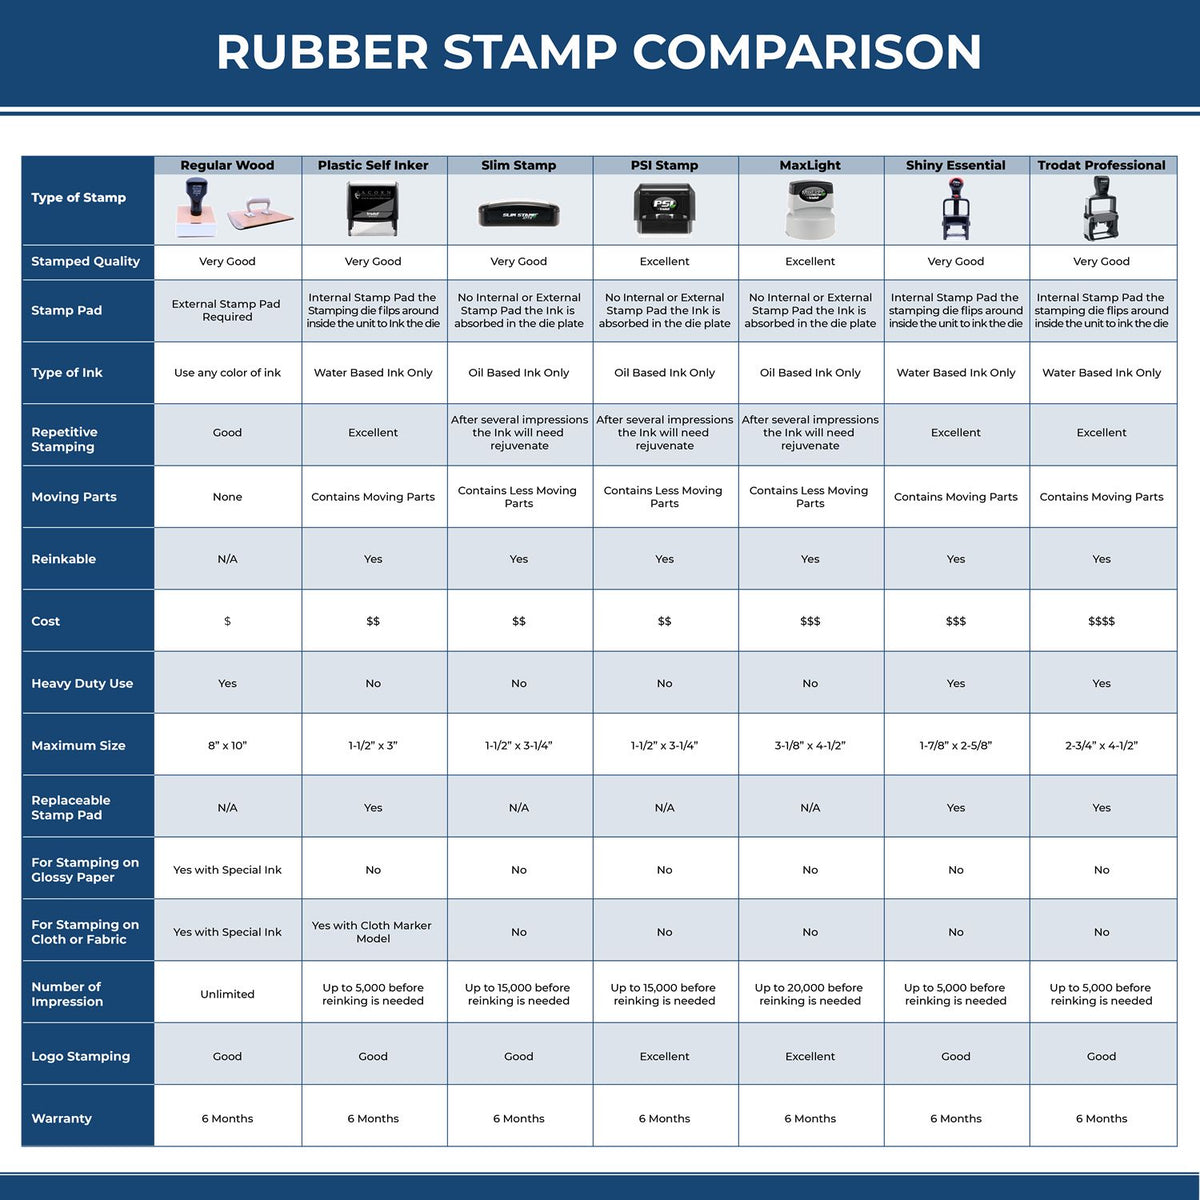 Letter Post Air Rubber Stamp 4411R Rubber Stamp Comparison